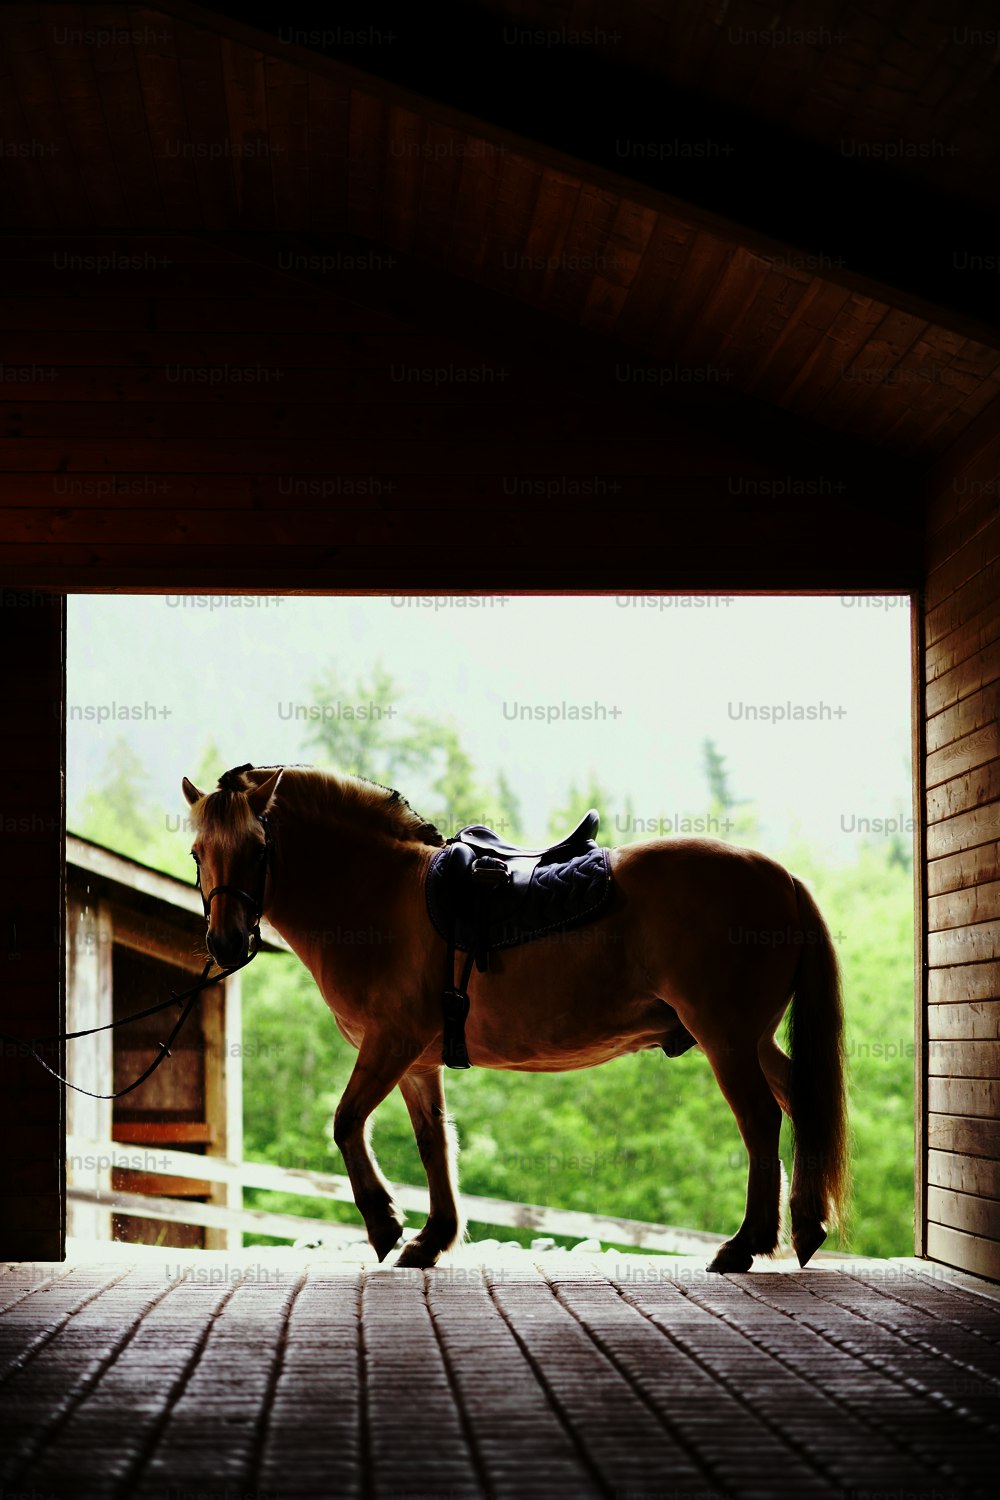 a brown horse wearing a saddle standing in a stable